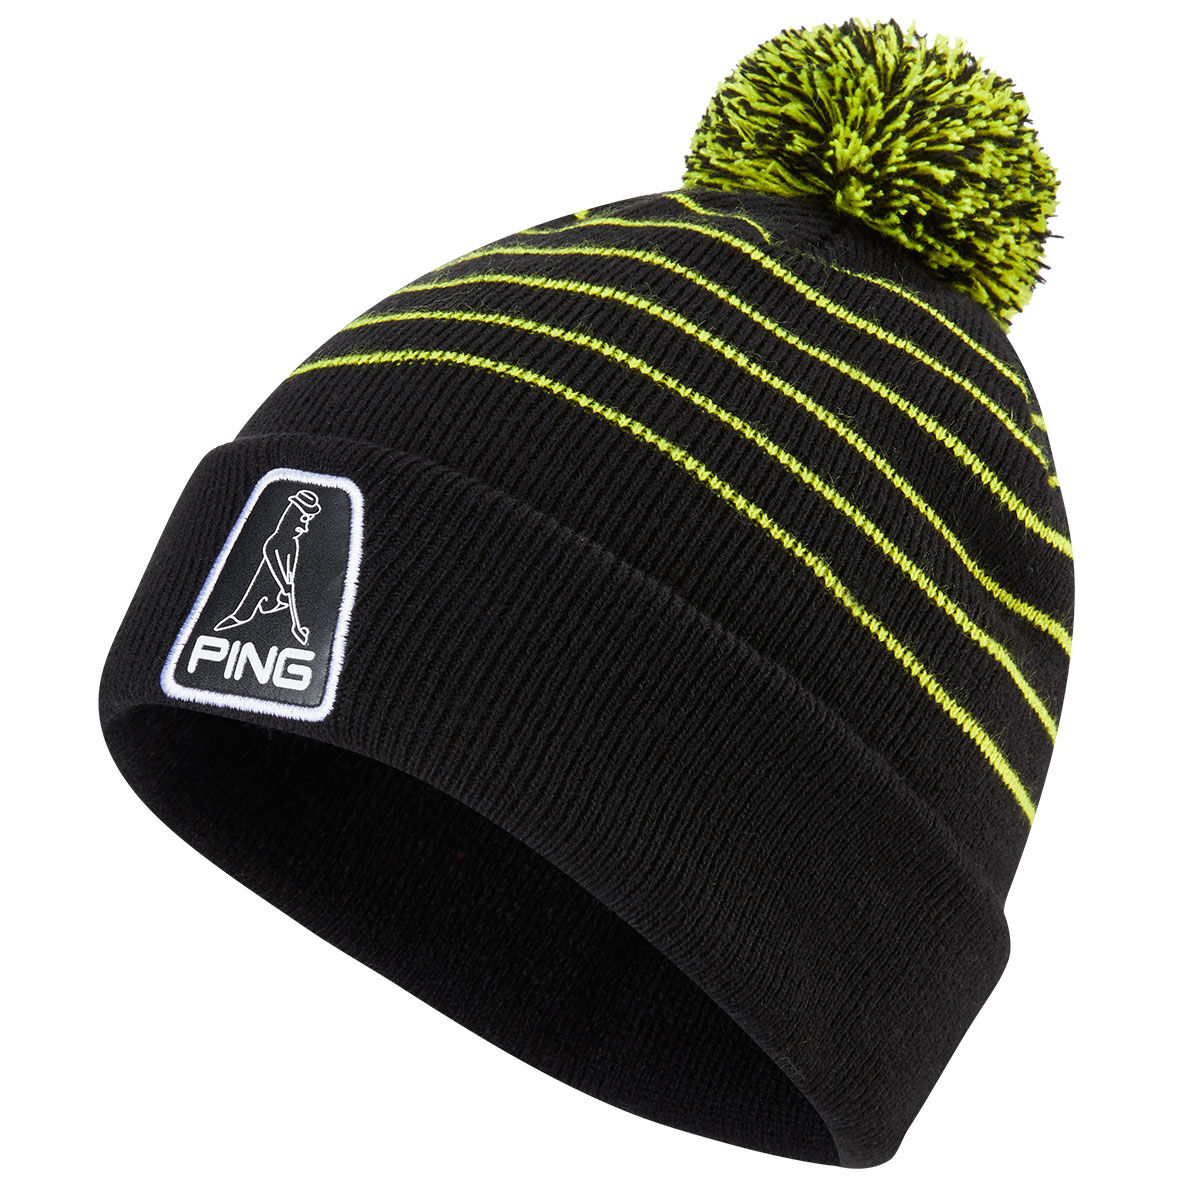 PING Men's Mr Ping Bobble Hat, Mens, Black/neon yellow, One size | American Golf von Ping